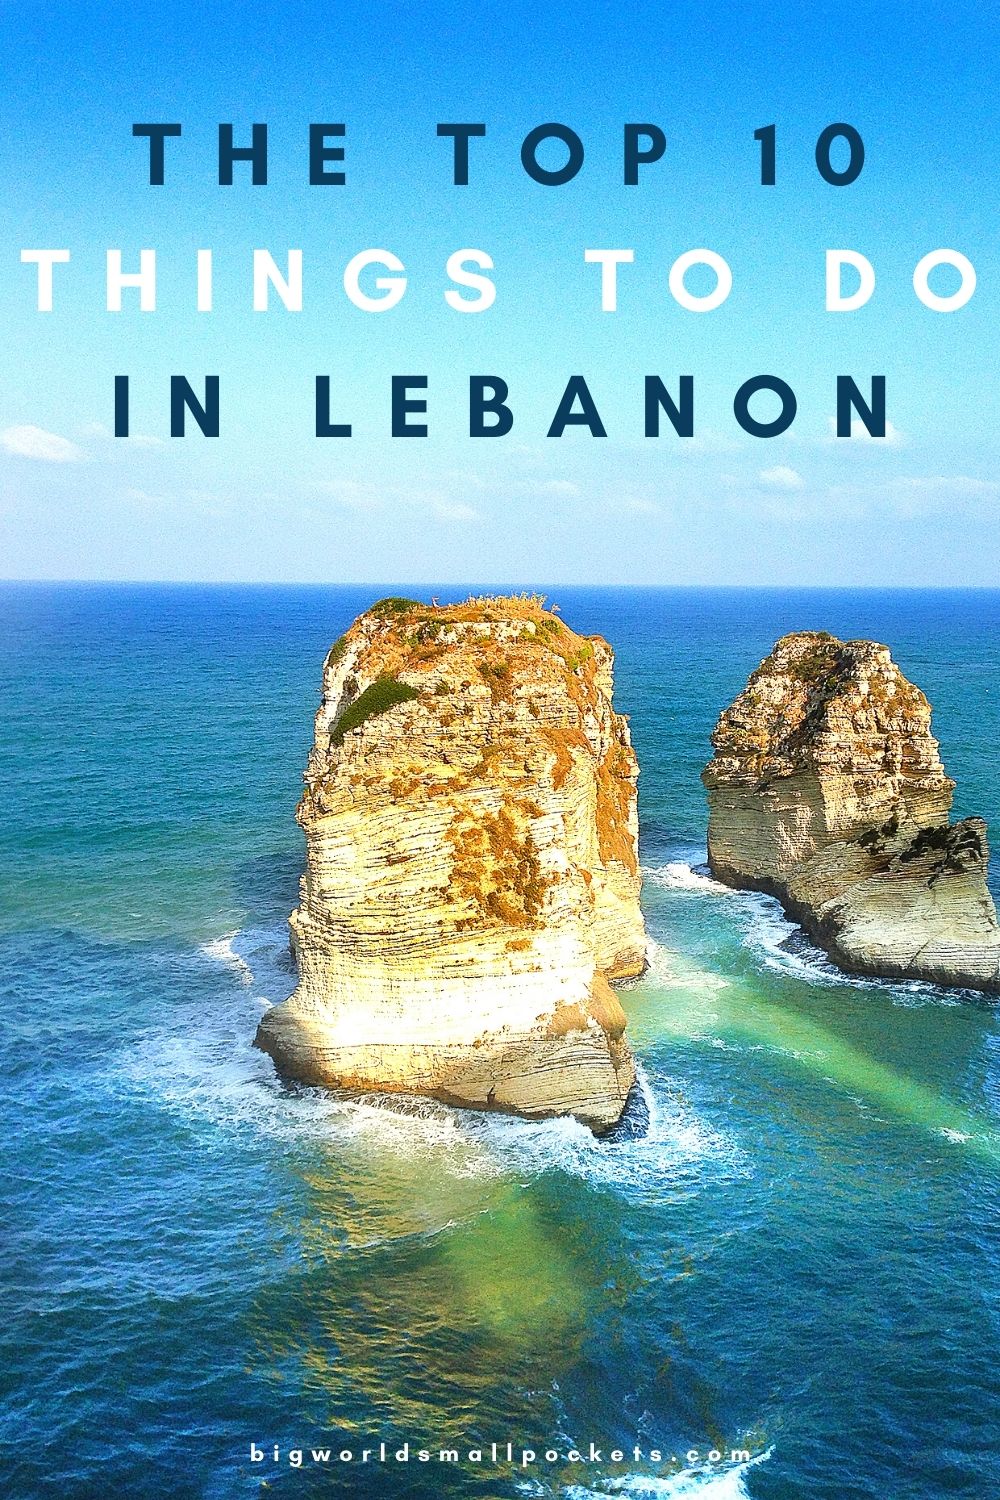 Top 10 Things To Do in Lebanon